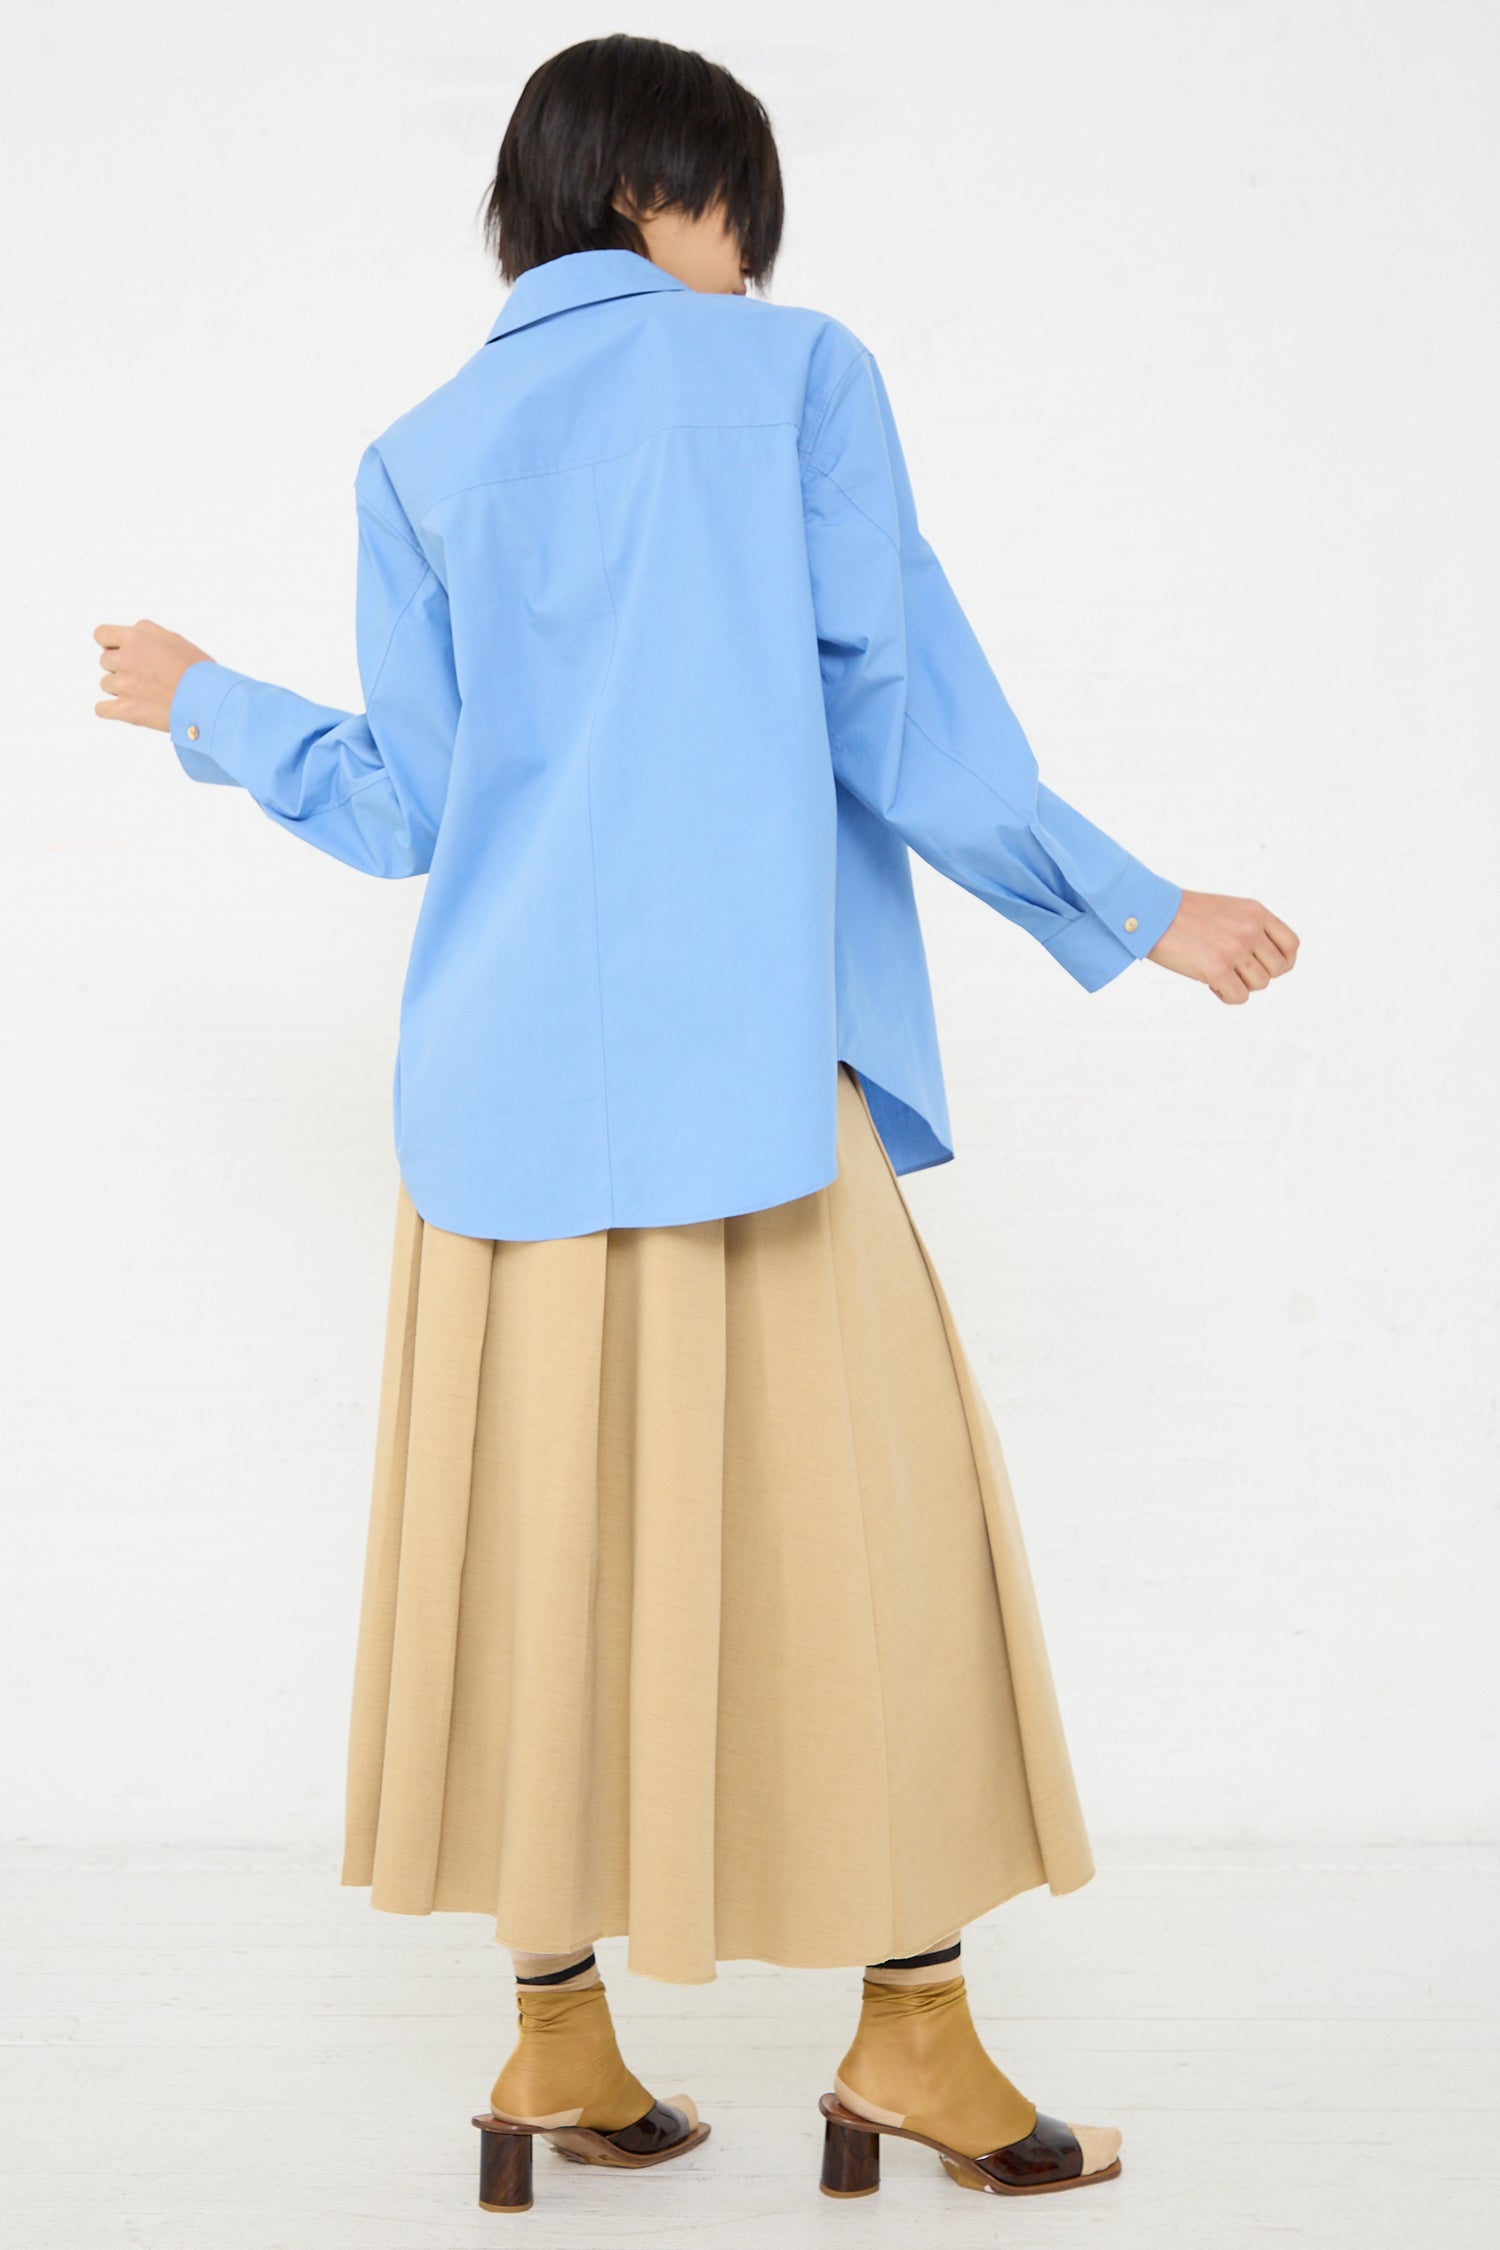 The back of a woman wearing an oversized fit, long sleeve Caprice shirt in blue by Rejina Pyo.